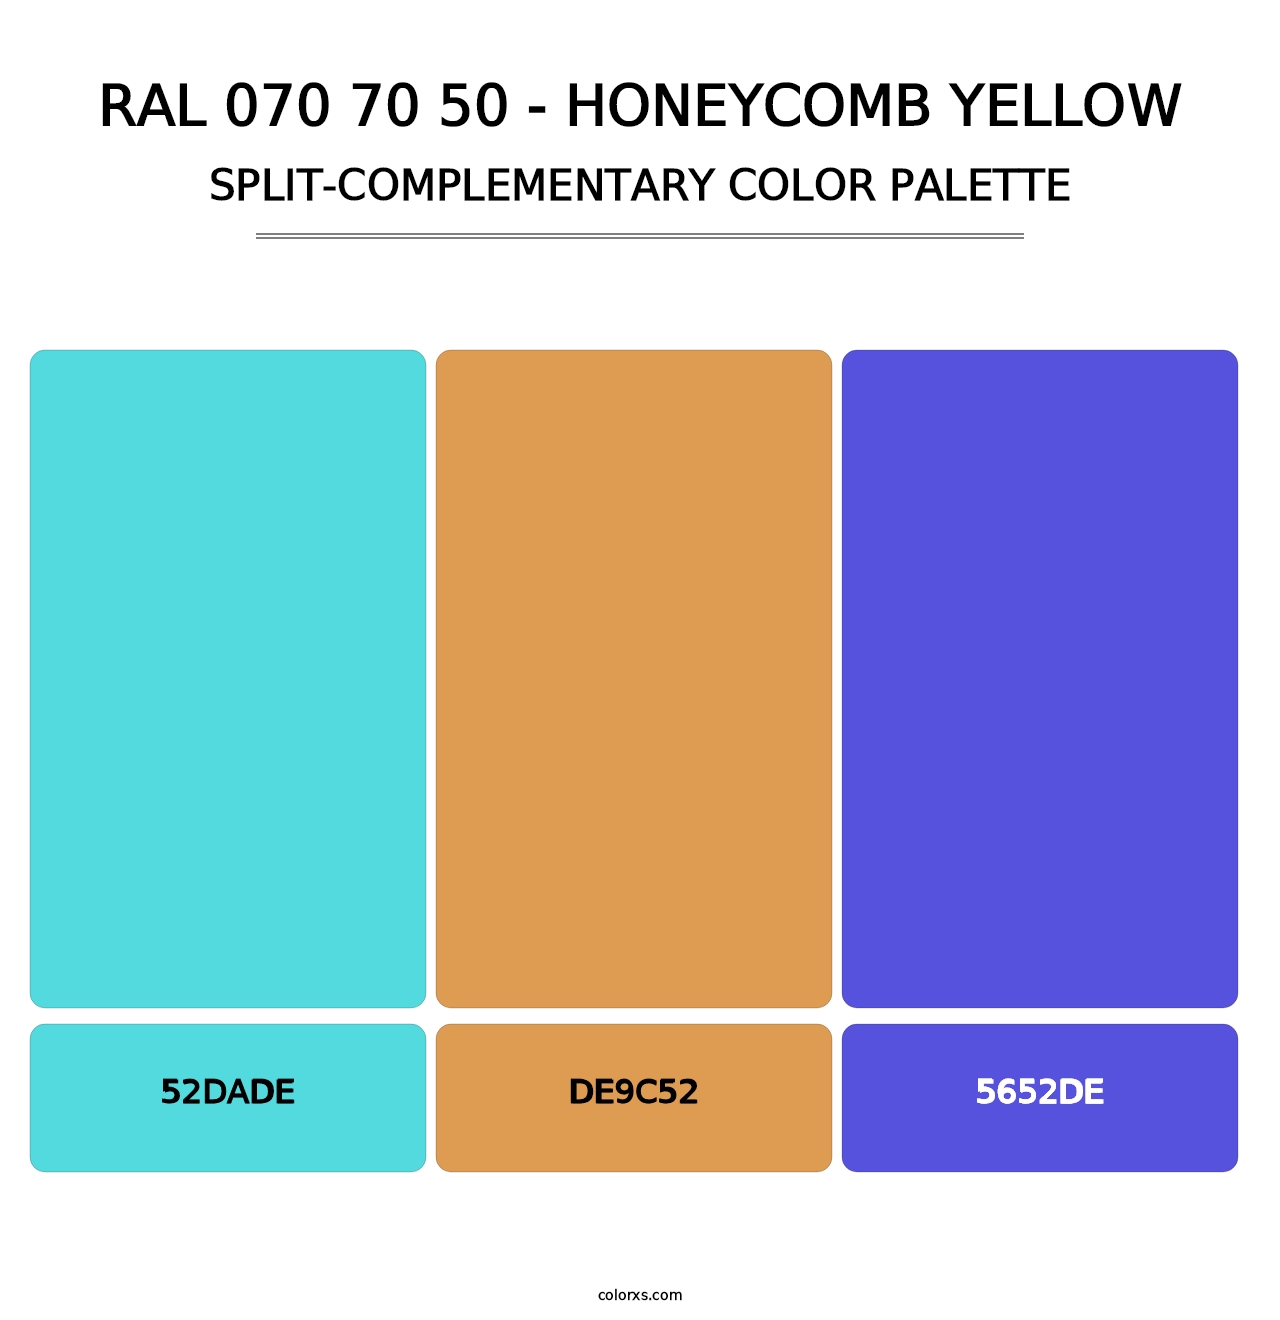 RAL 070 70 50 - Honeycomb Yellow - Split-Complementary Color Palette